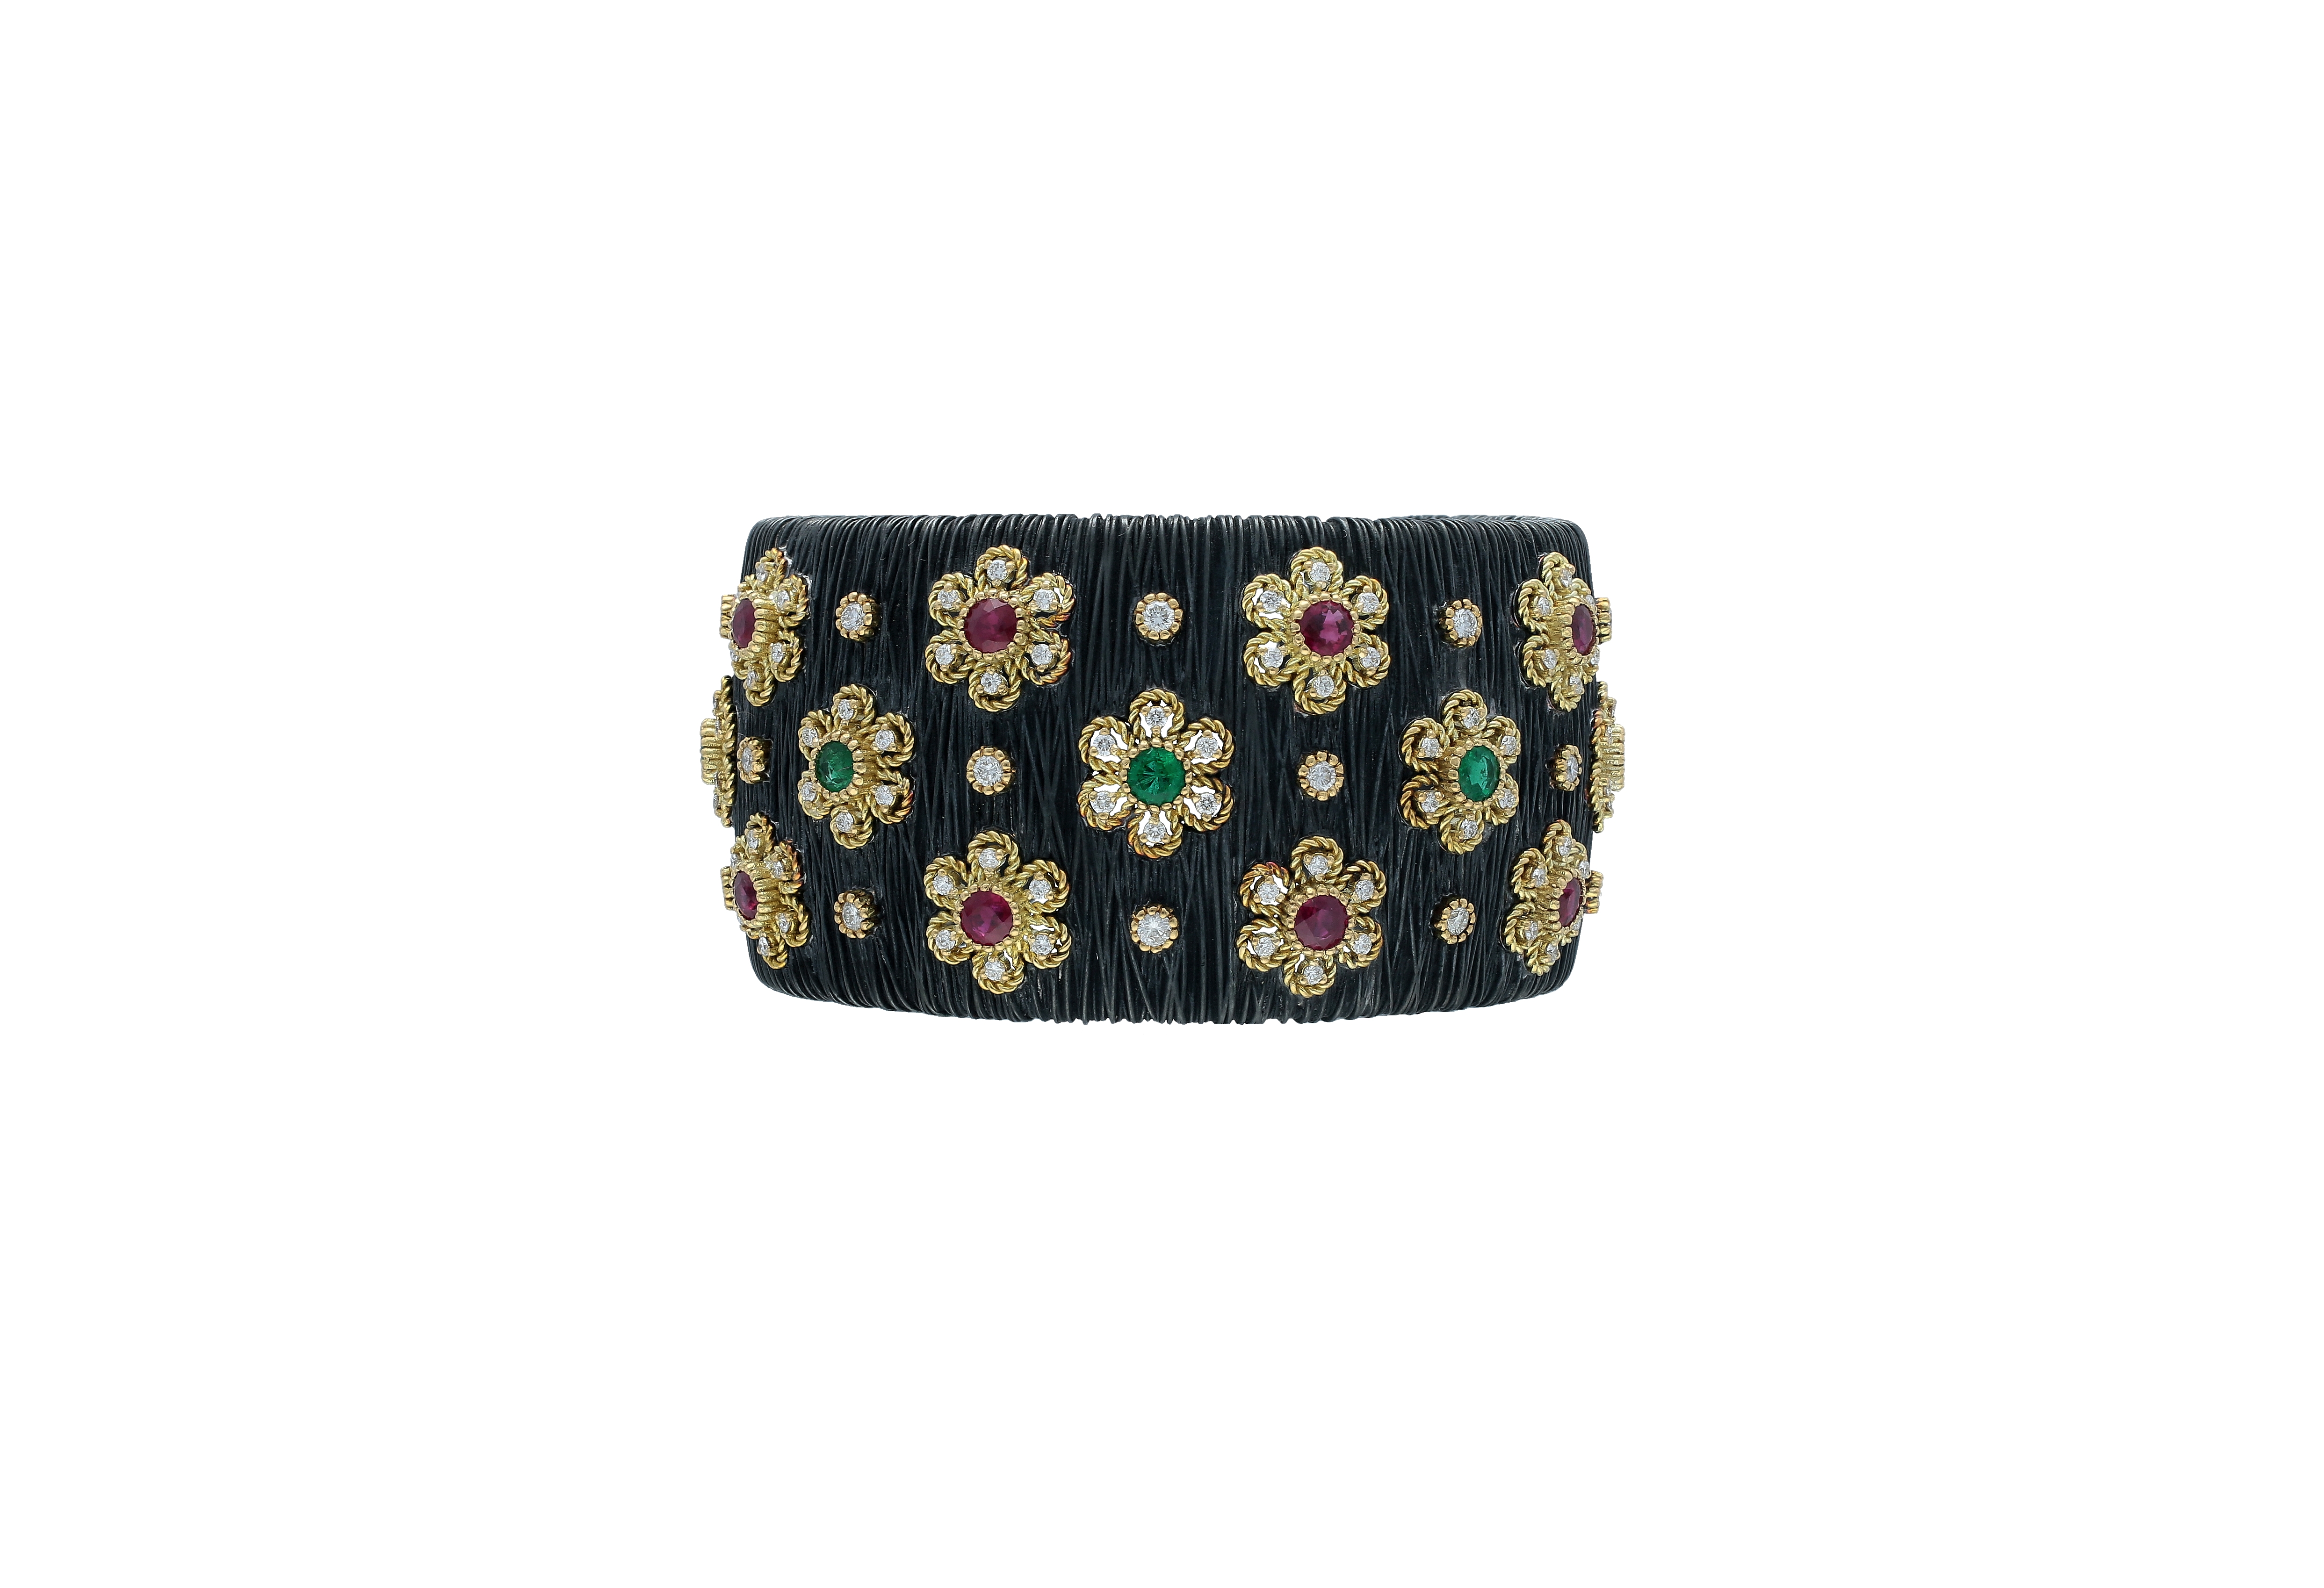 Roots Garden Collection cuff bracelet in yellow gold 18kt and silver oxidized with diamonds, rubies and emeralds